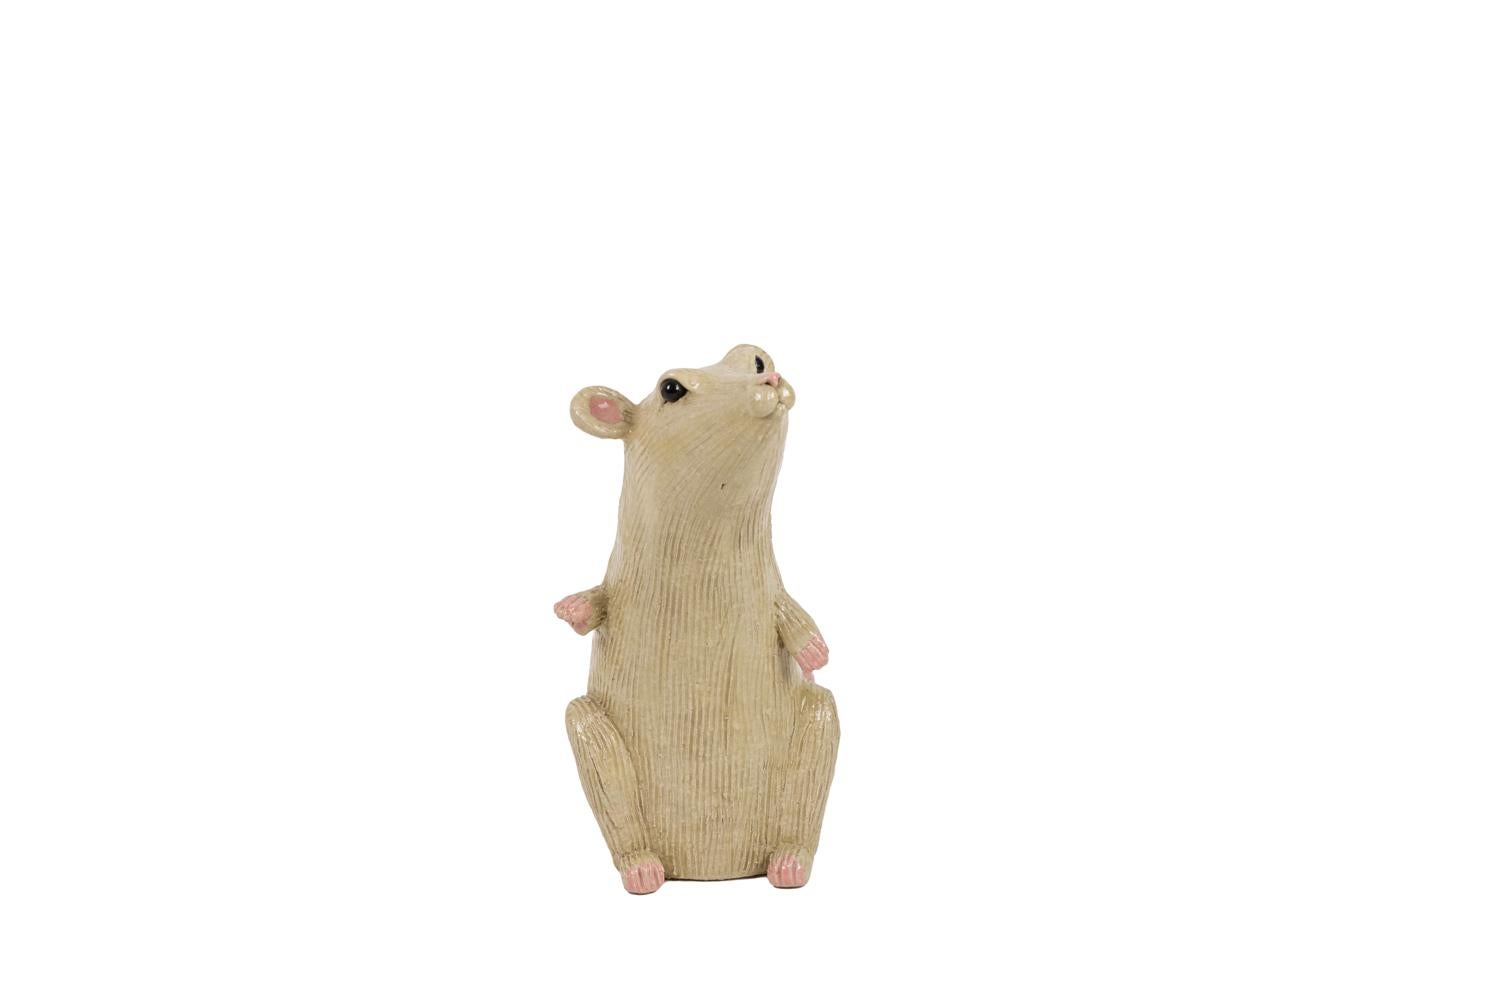 Valérie Courtet, signed.
Glazed stoneware sculpture figuring a cream colored rat with a striped skin. It is sat on its back legs and raises the head to the top. Its ears, its nose, its paws and its tail are pink.

French contemporary